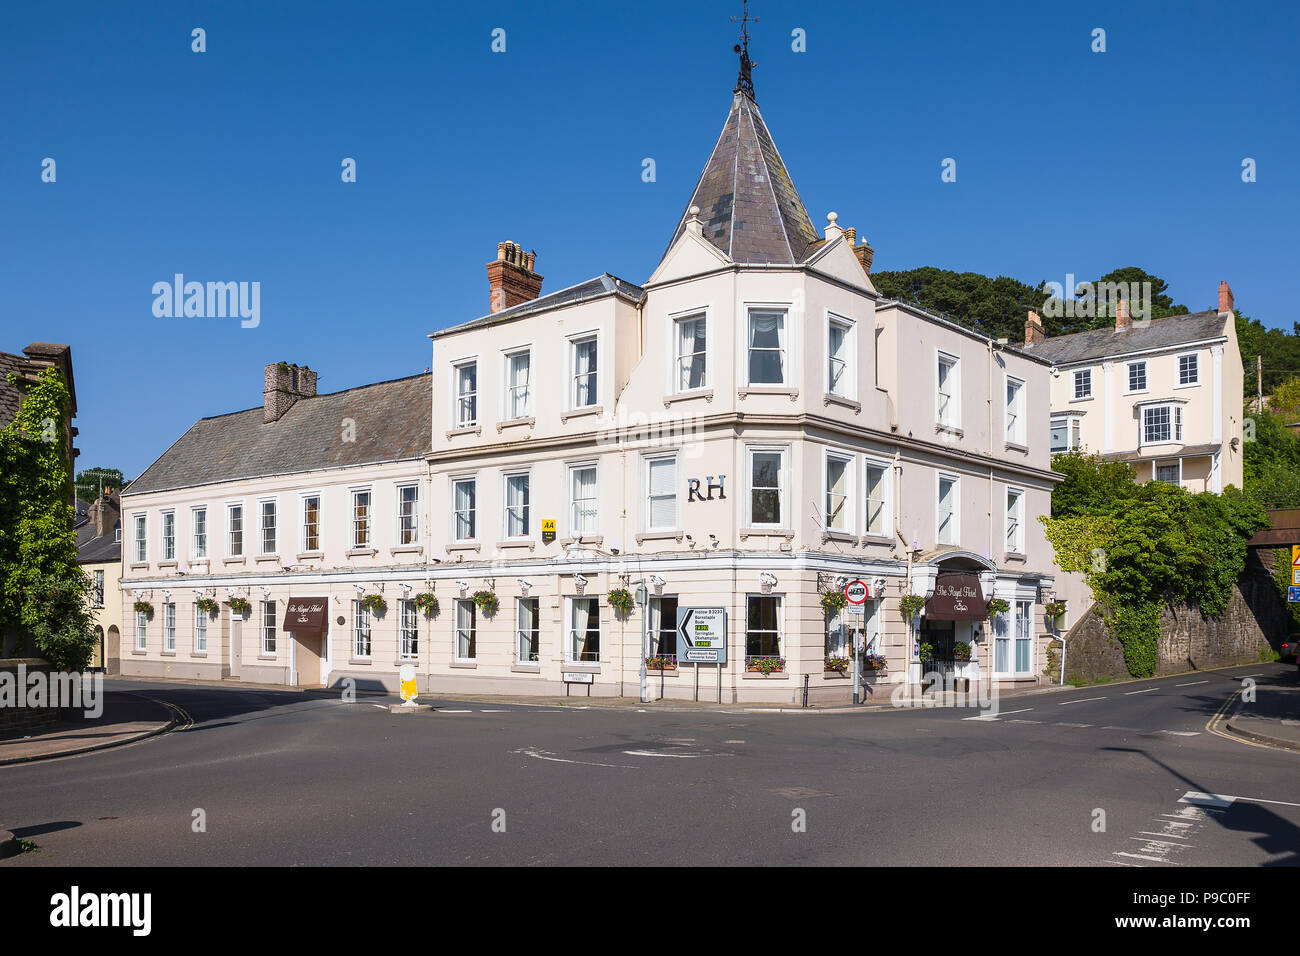 The Royal Hotel in Bideford Devon England UK - one of the many white buildings in the ancient West Country town Stock Photo